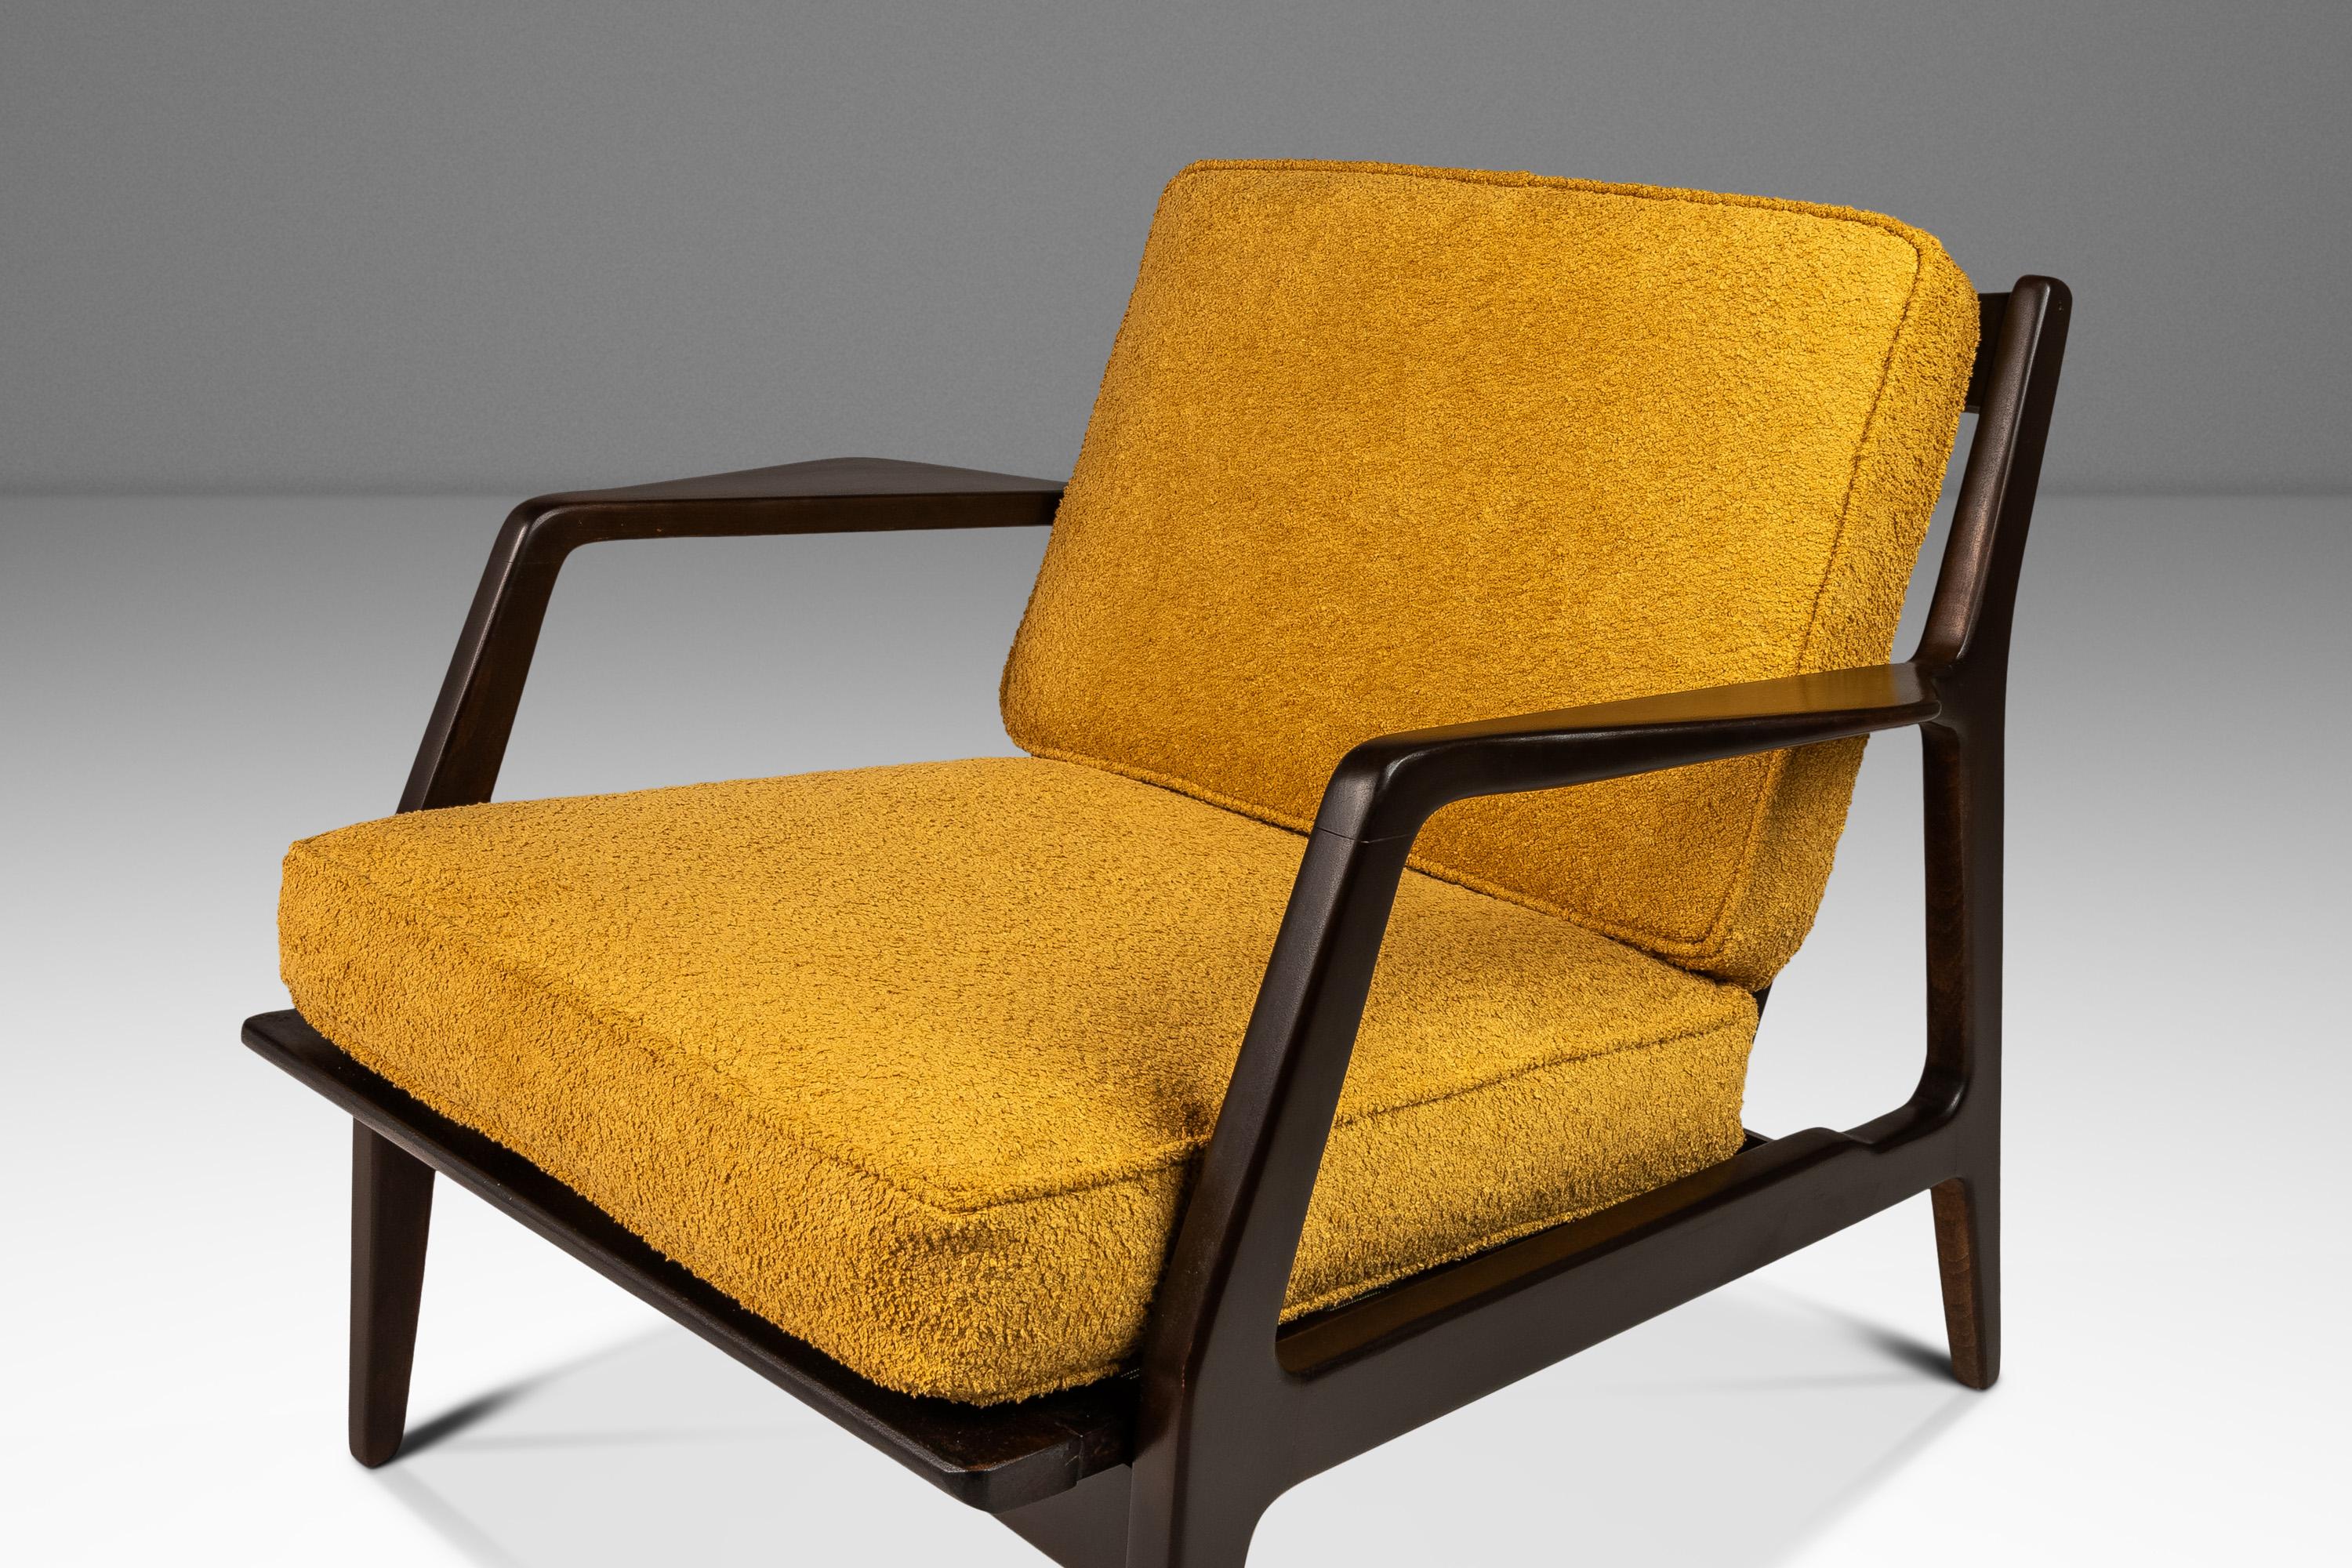 Model 596 Lounge Chair by Lawrence Peabody & Ib Kofod Larsen for Selig, c. 1950s For Sale 4